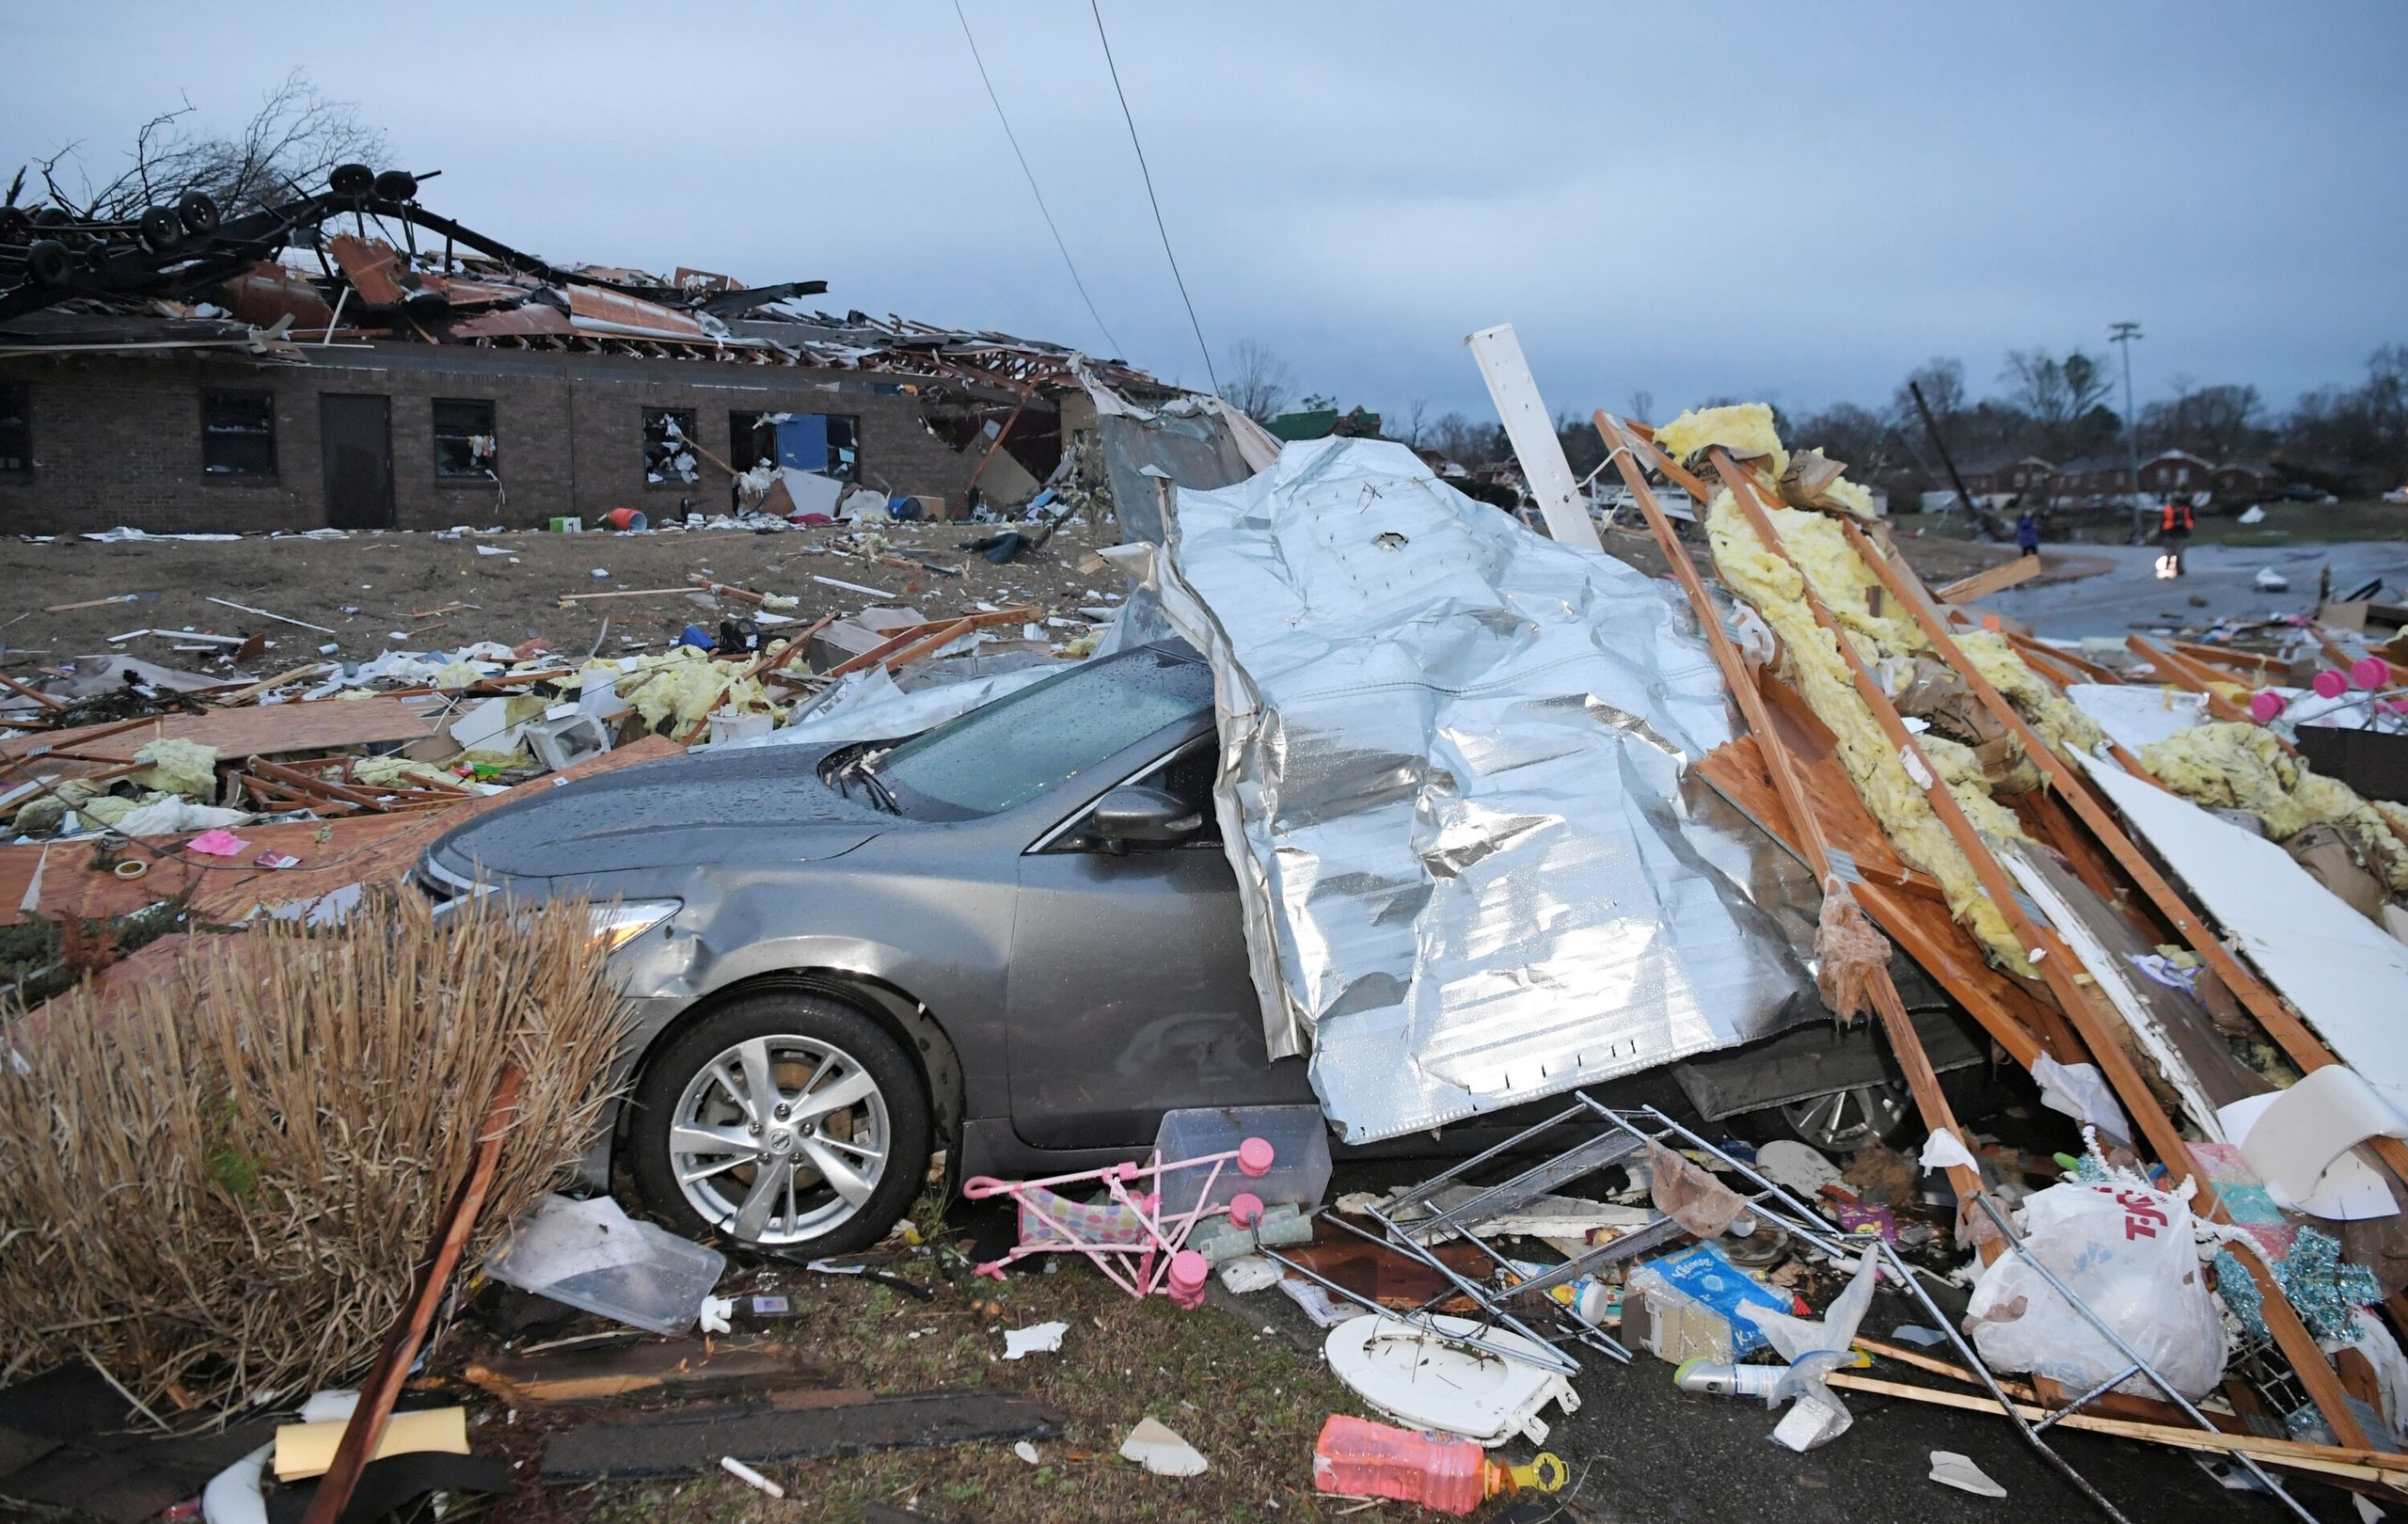 Dramatic Photos Show Destruction From Deadly Nashville Tornadoes HuffPost